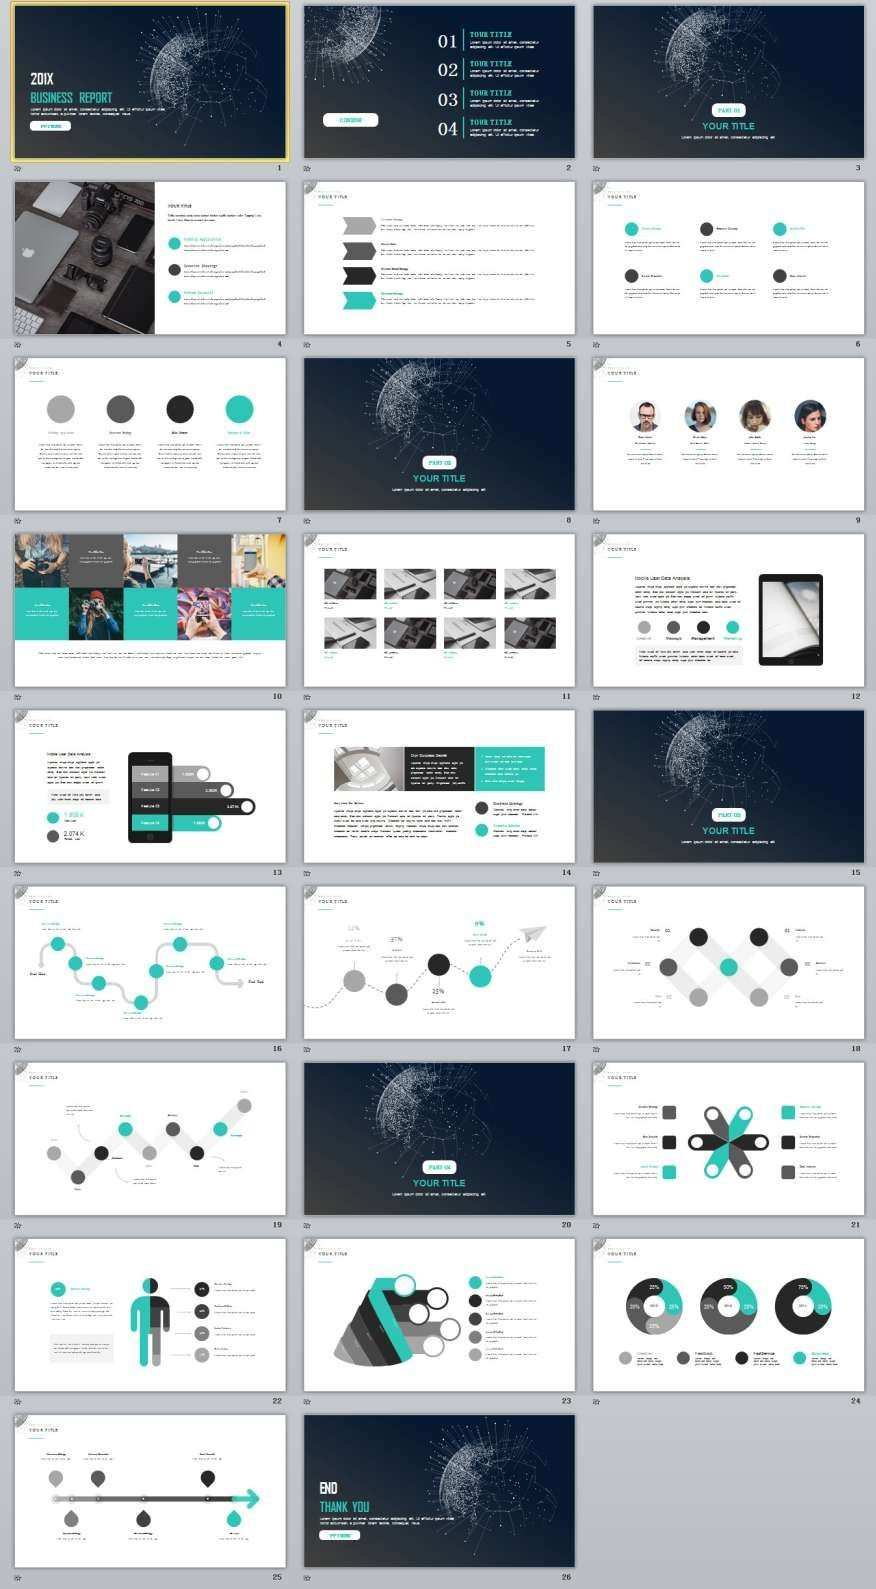 26 White Best Business Powerpoint Templates 28 Yellow Best Slide Creative Powerpoint Templates La Me In 2020 Powerpoint Vorlagen Powerpoint Prasentation Infografik